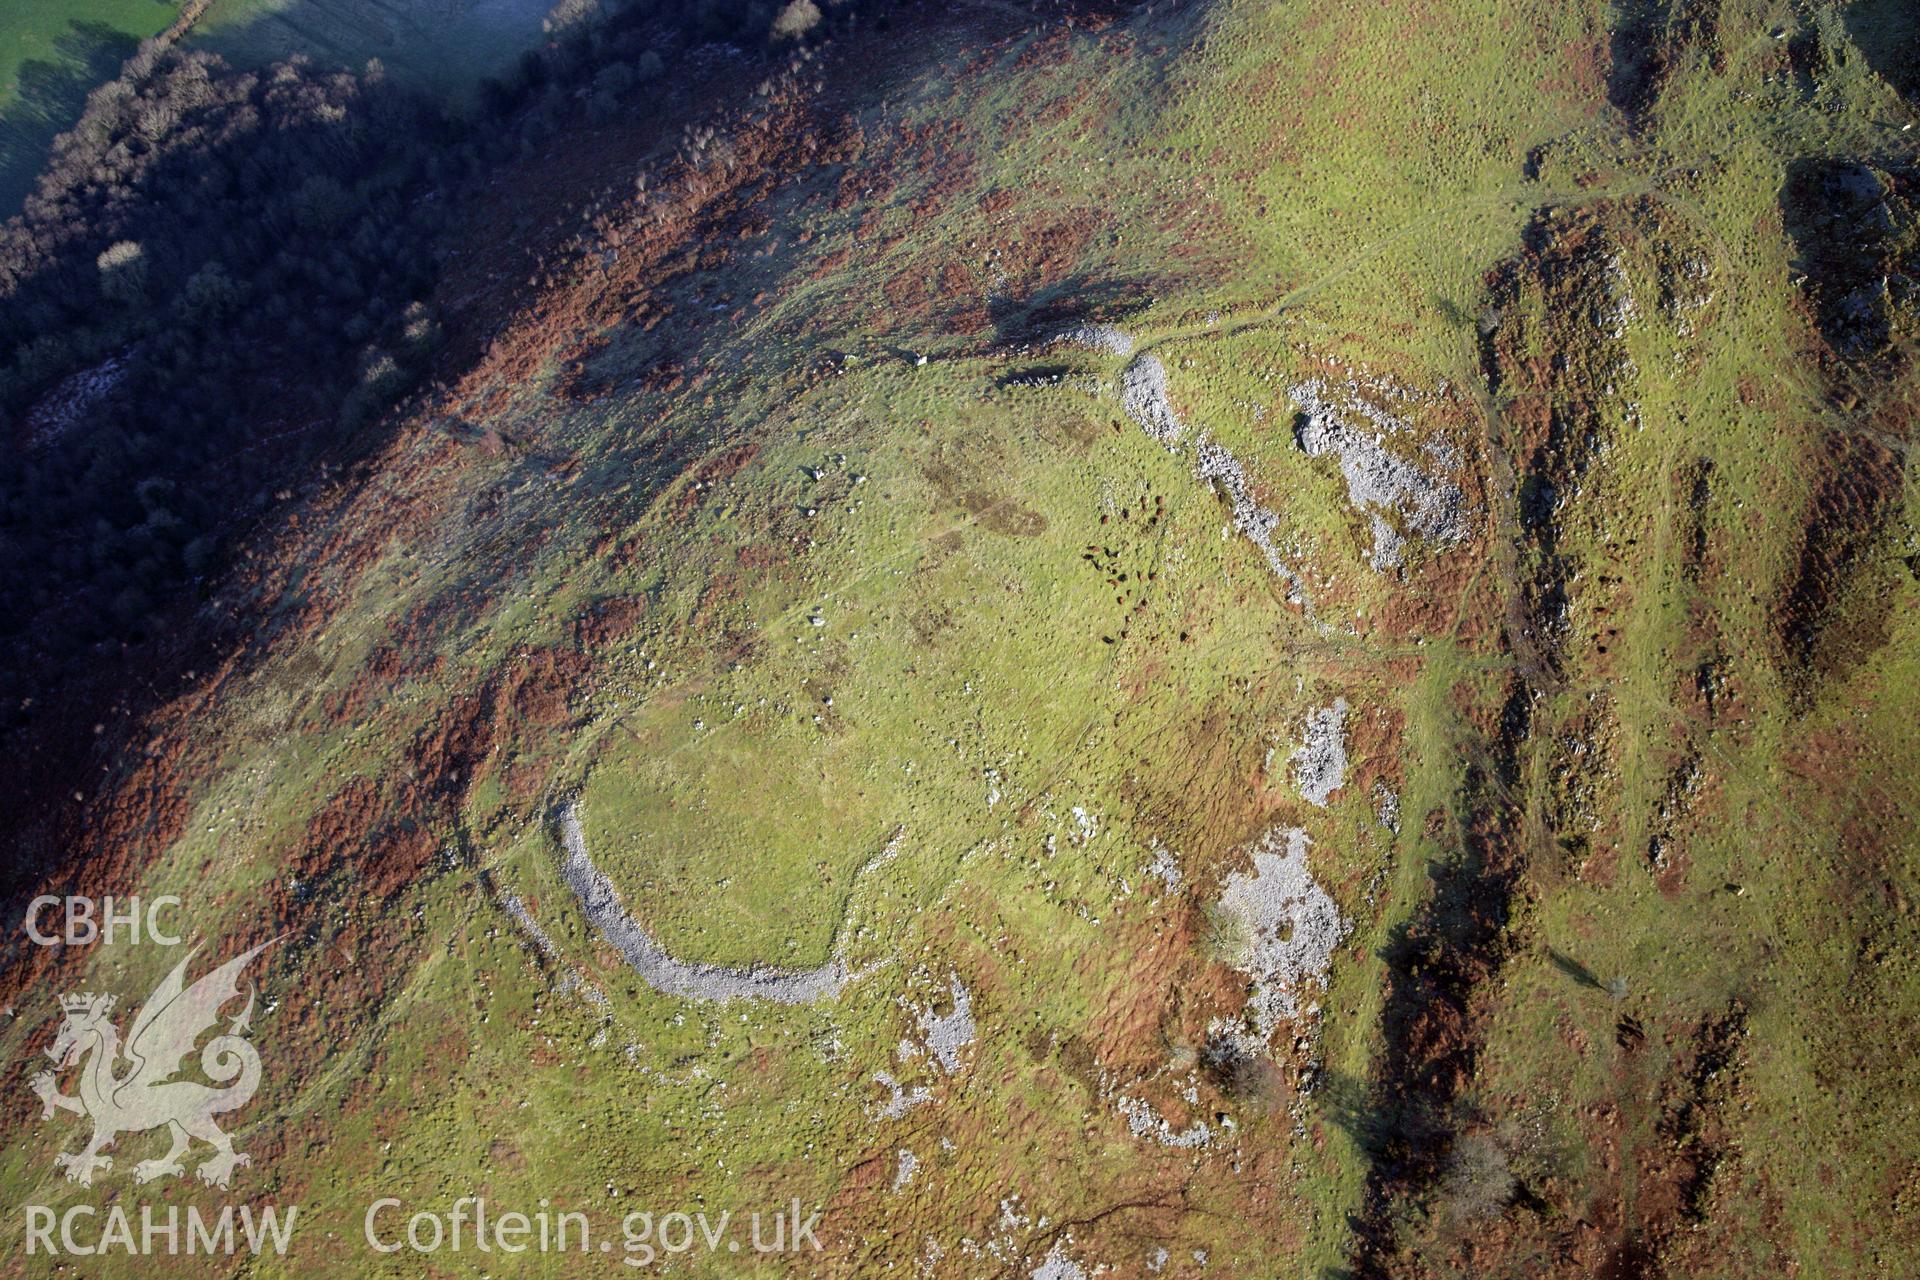 RCAHMW colour oblique photograph of Gaer Fach. Taken by Toby Driver on 02/02/2012.